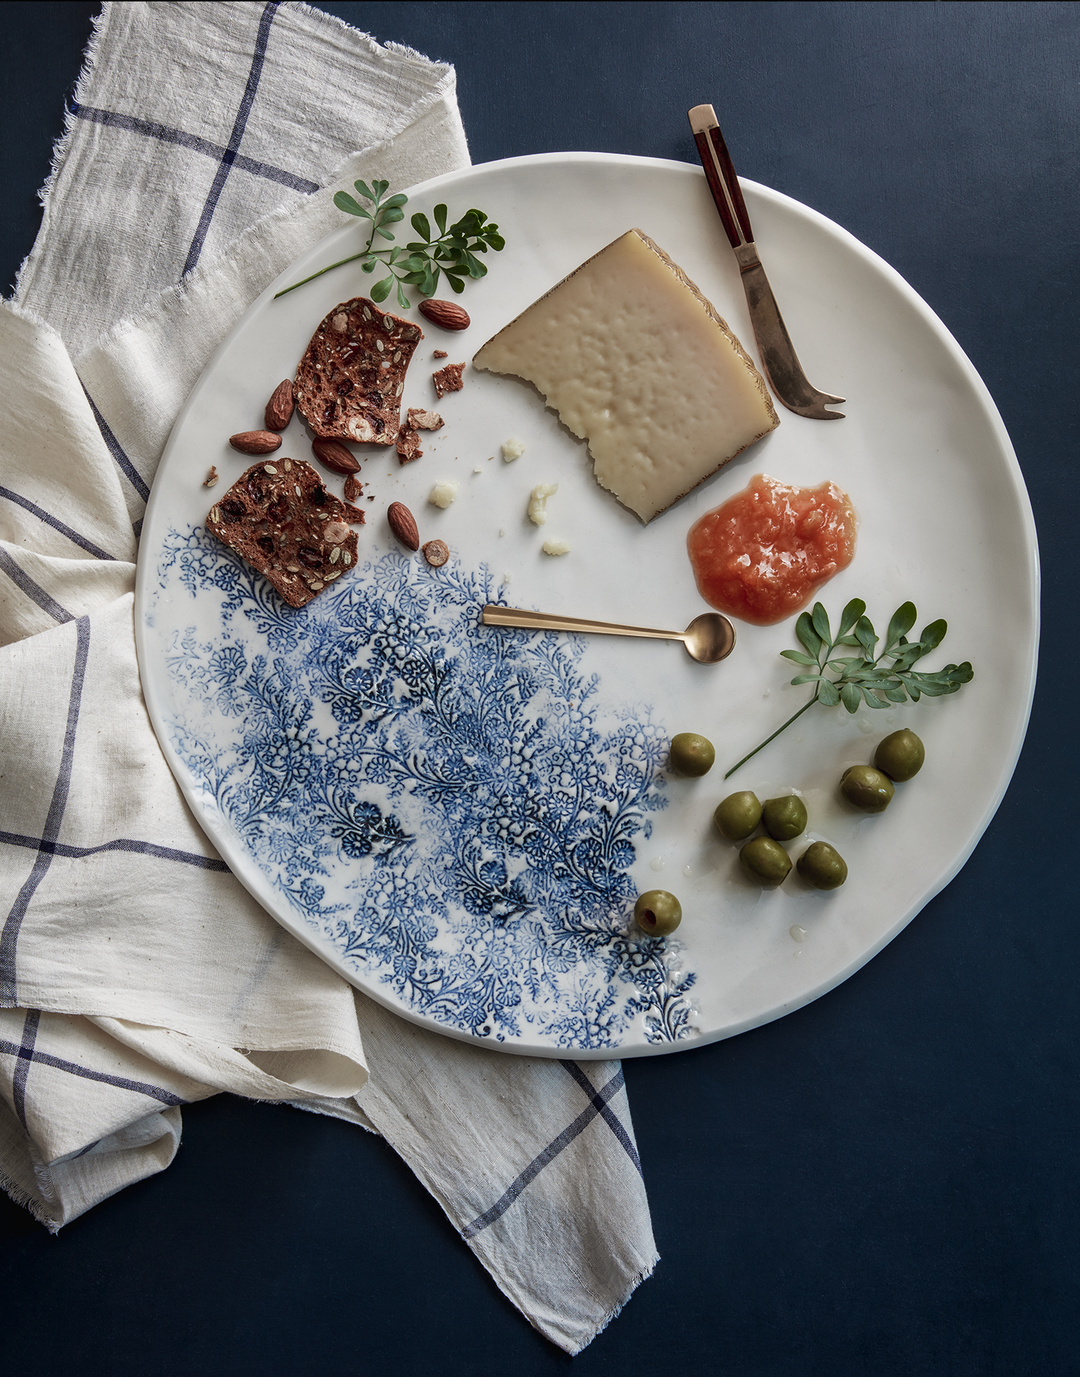 DBO HOME white artisan ceramic xl platter with blue kashmir indian woodblock print design serving cheese and olives with white linen cloth